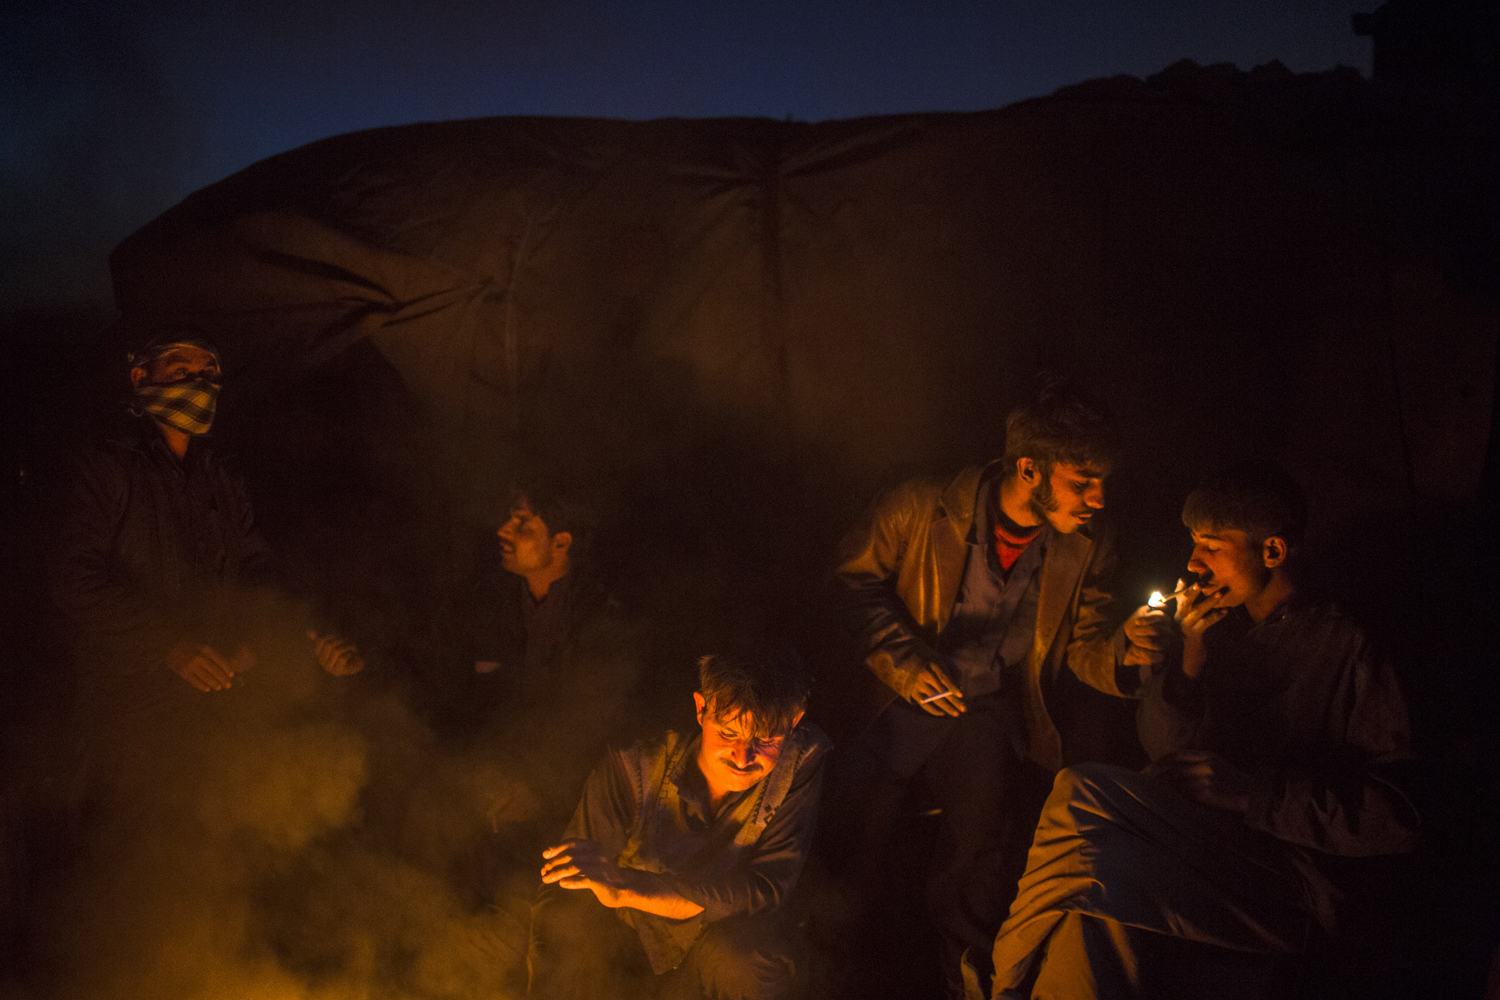 Image: Nov. 14, 2012. Afghan boys sit around a fire after scavenging for recyclables at a garbage dump site in Kabul.